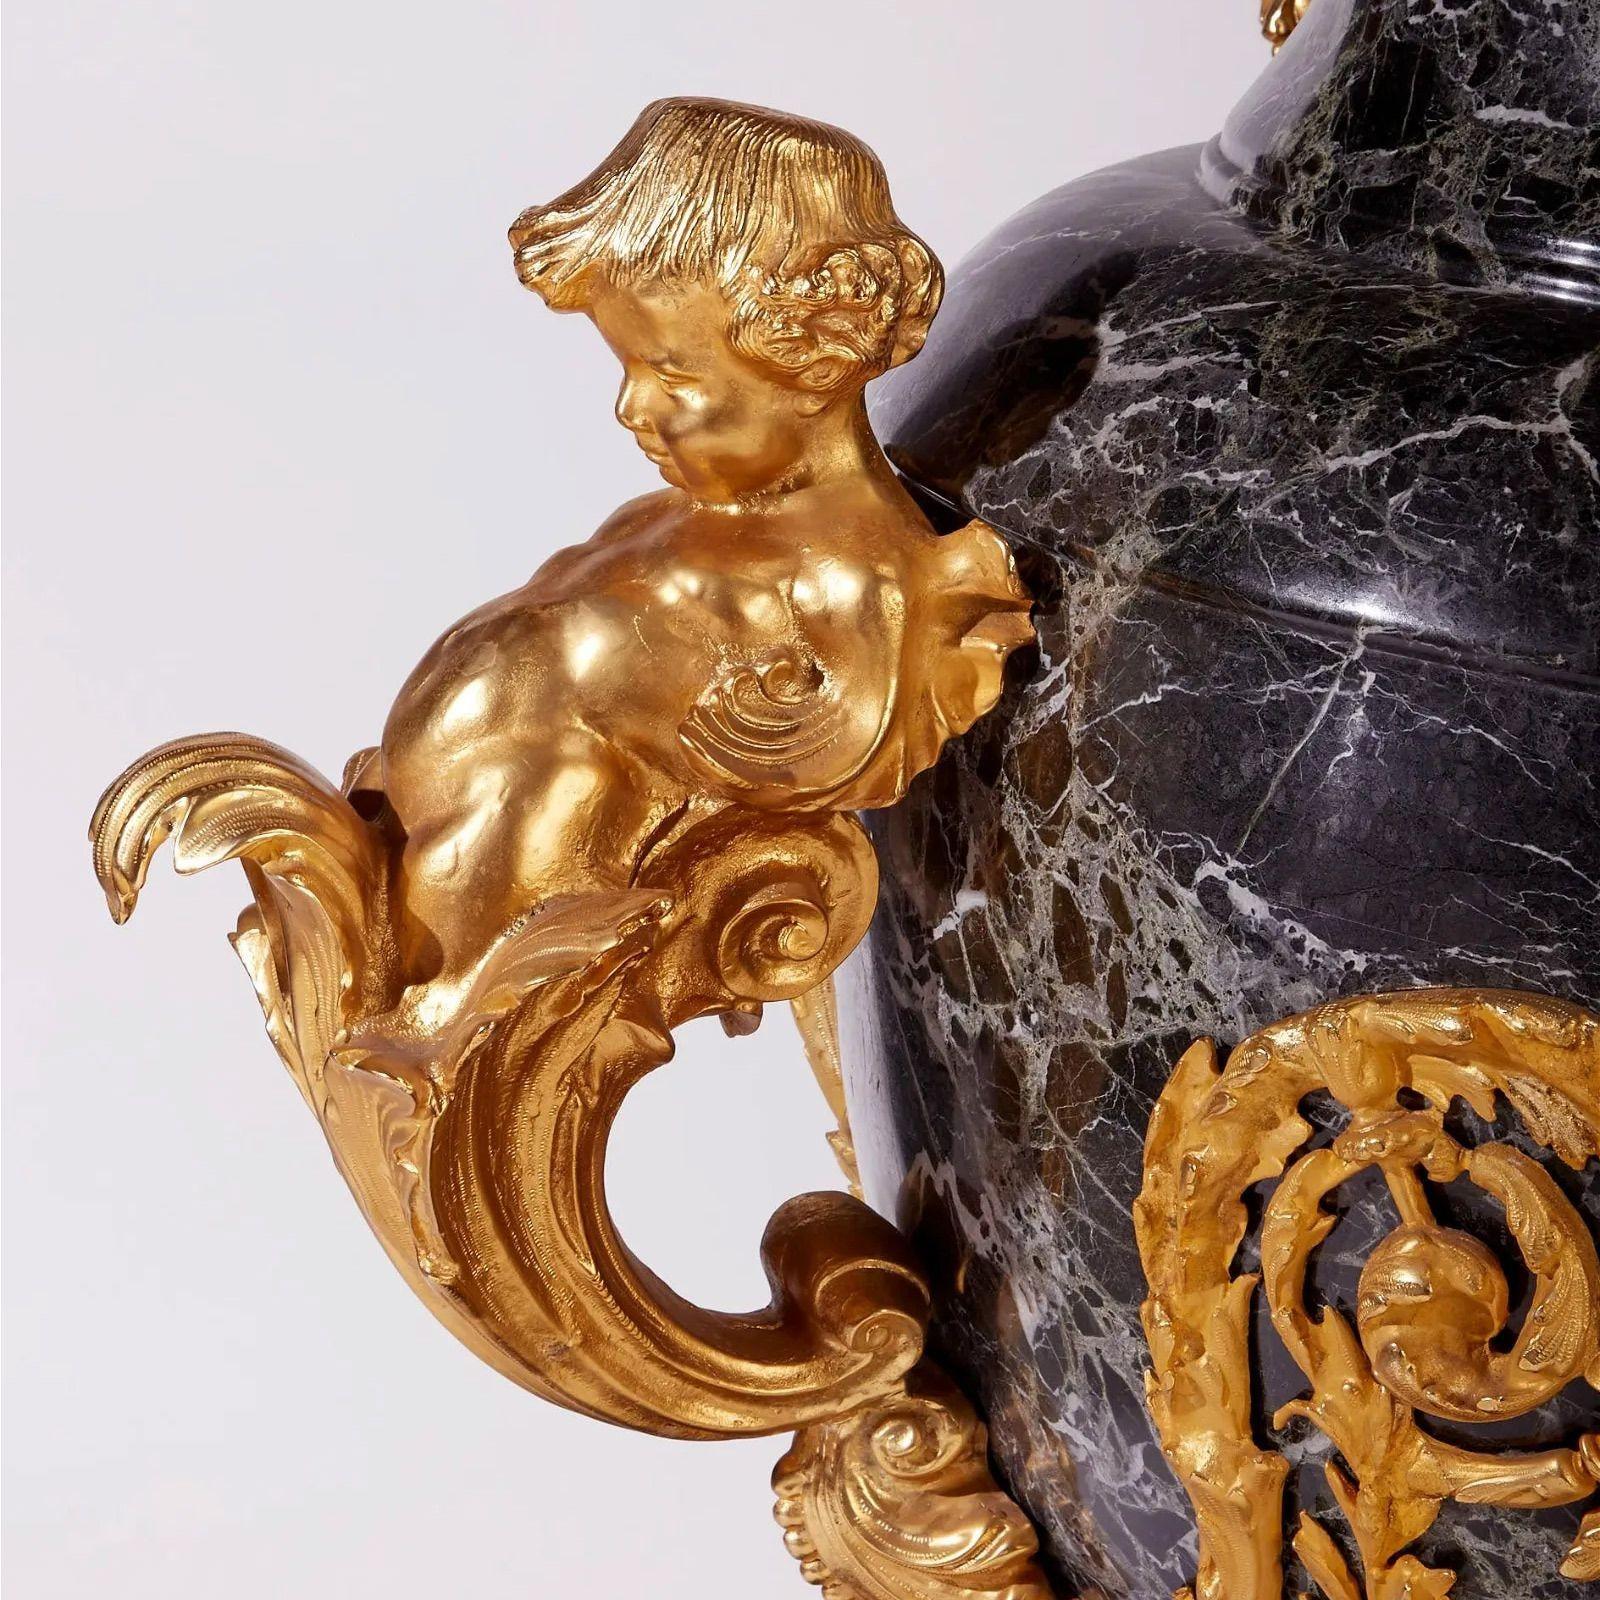 Pair of marble gilt-bronze floor Urns, late 19th century

In the style of Imperial Russia, a pair of black marble urns ornamented with gilt-bronze putti figures
2 pieces
 
Dimensions

55